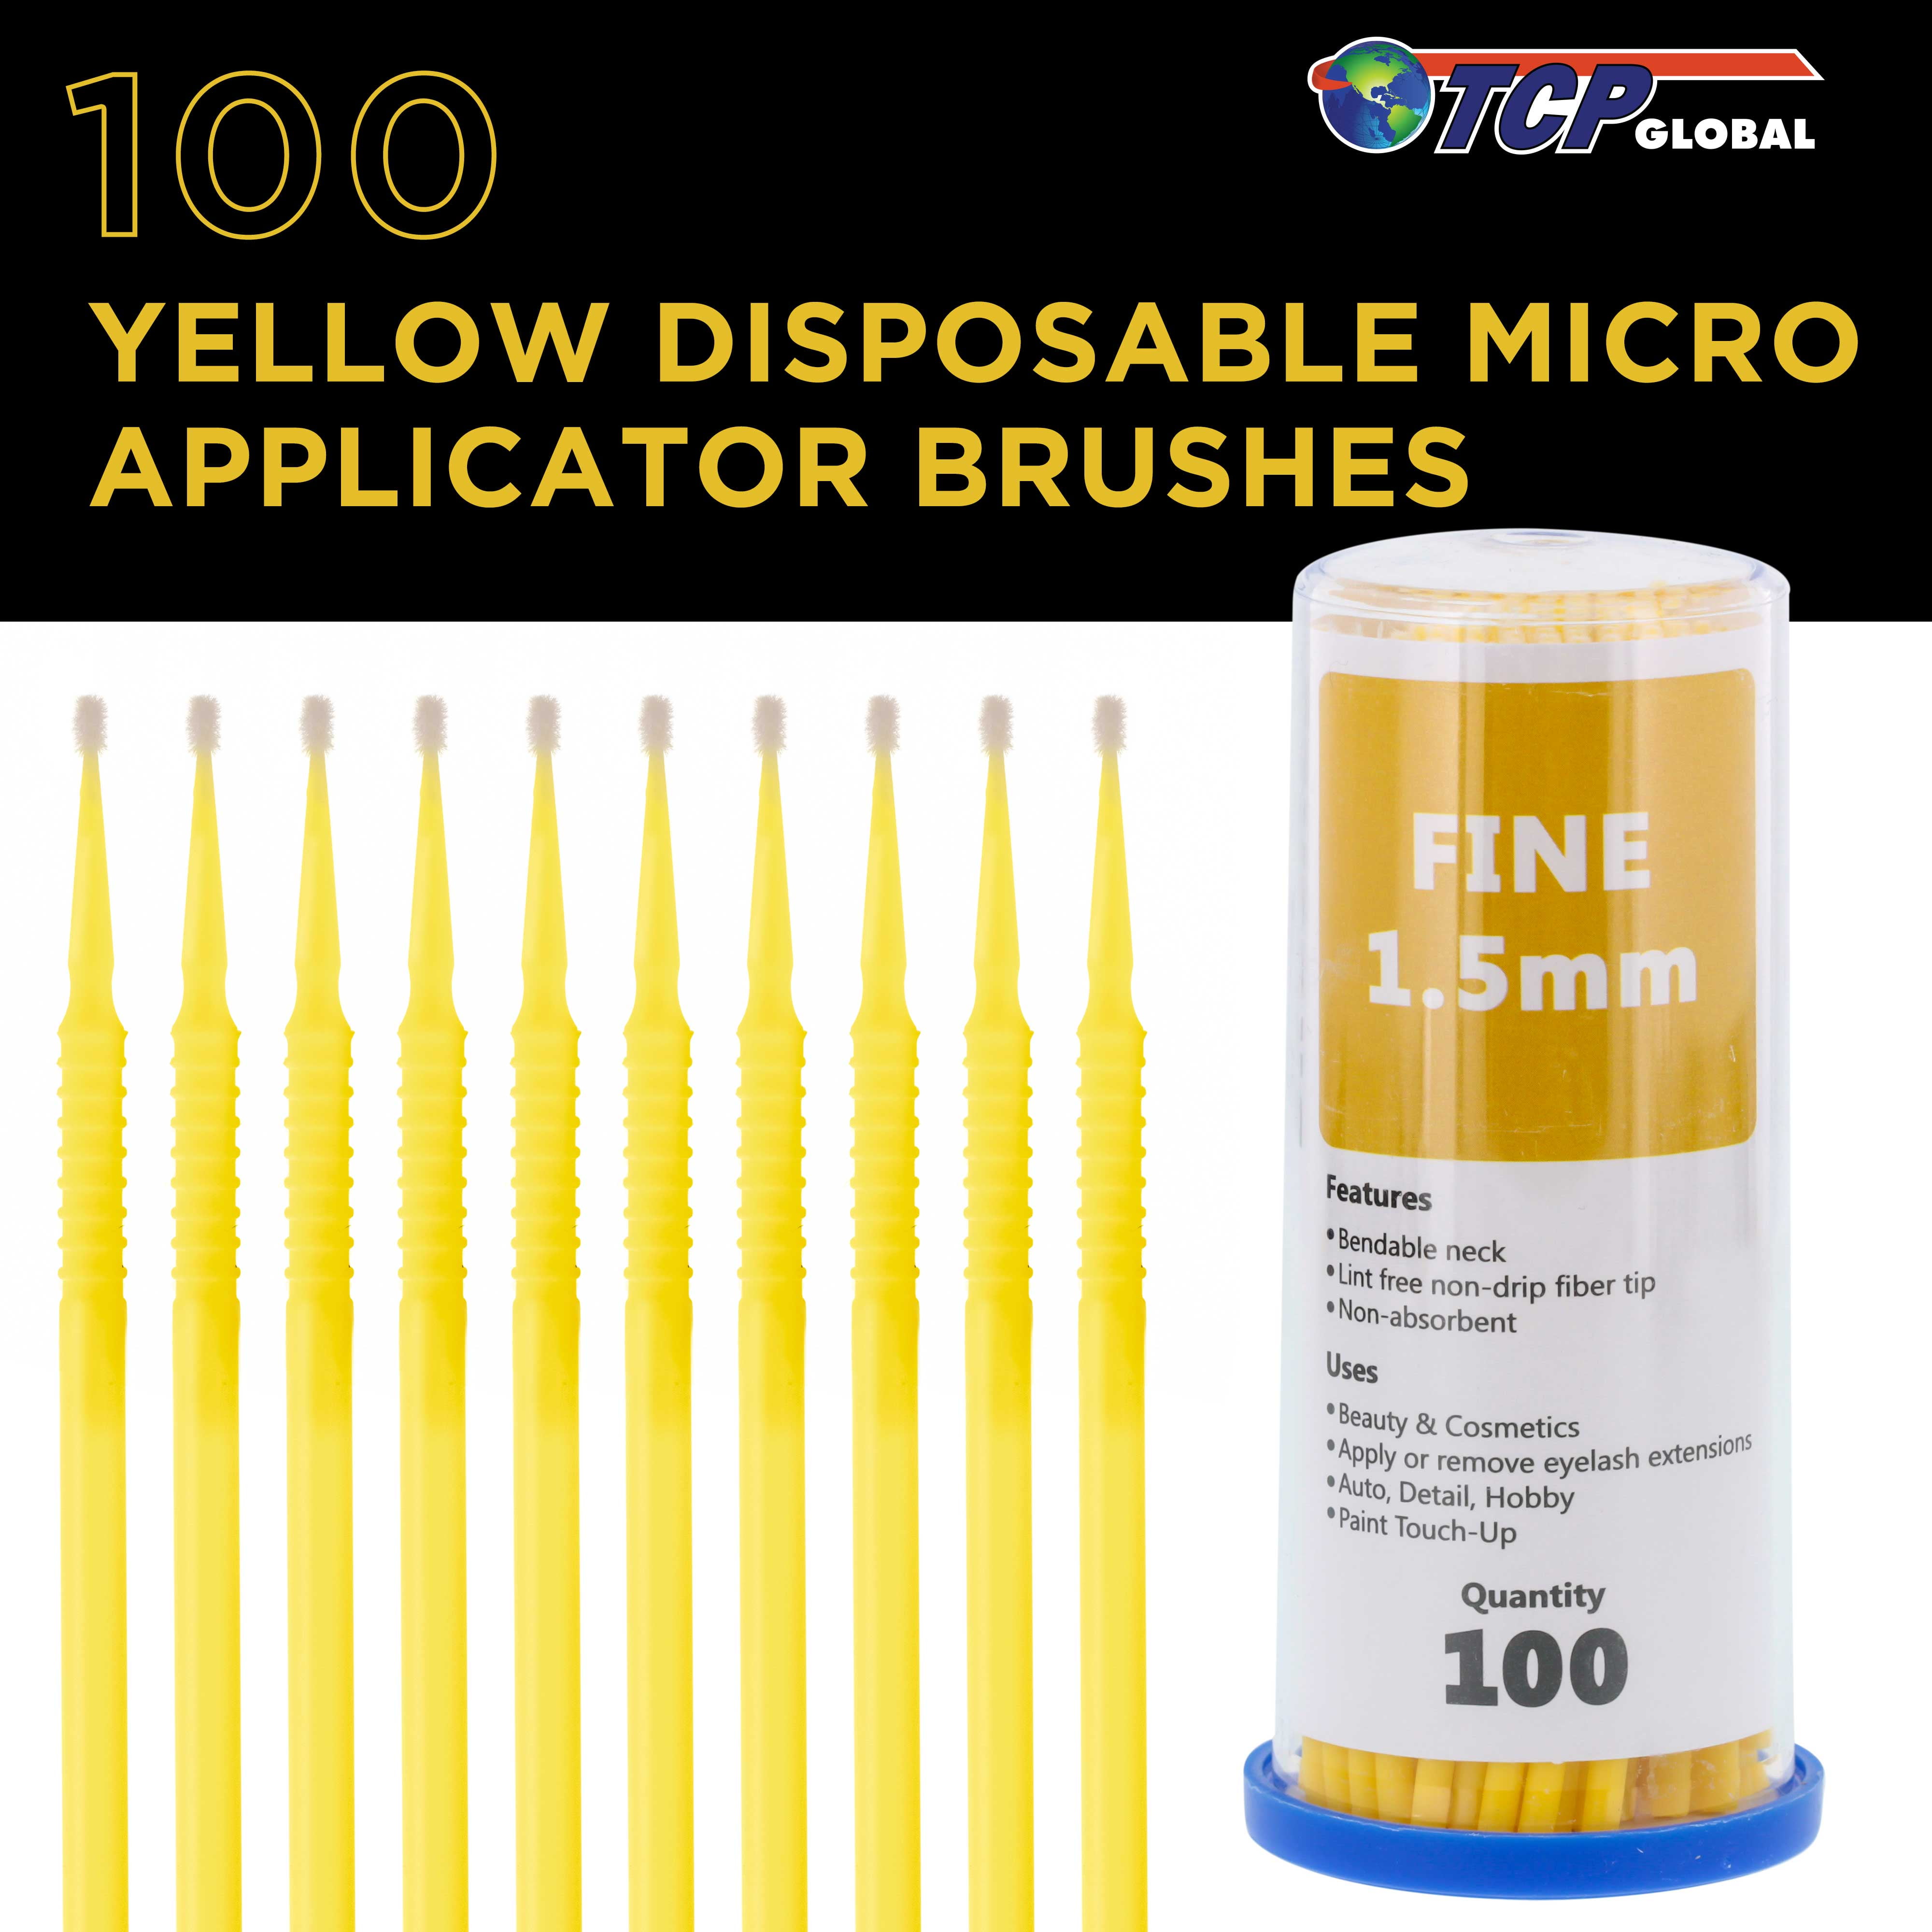 100 Paint Touch Up Brushes, Disposable Micro Brush Applicators, Yellow with  Fine 1.5 mm Tips Auto Body Shop Detailing